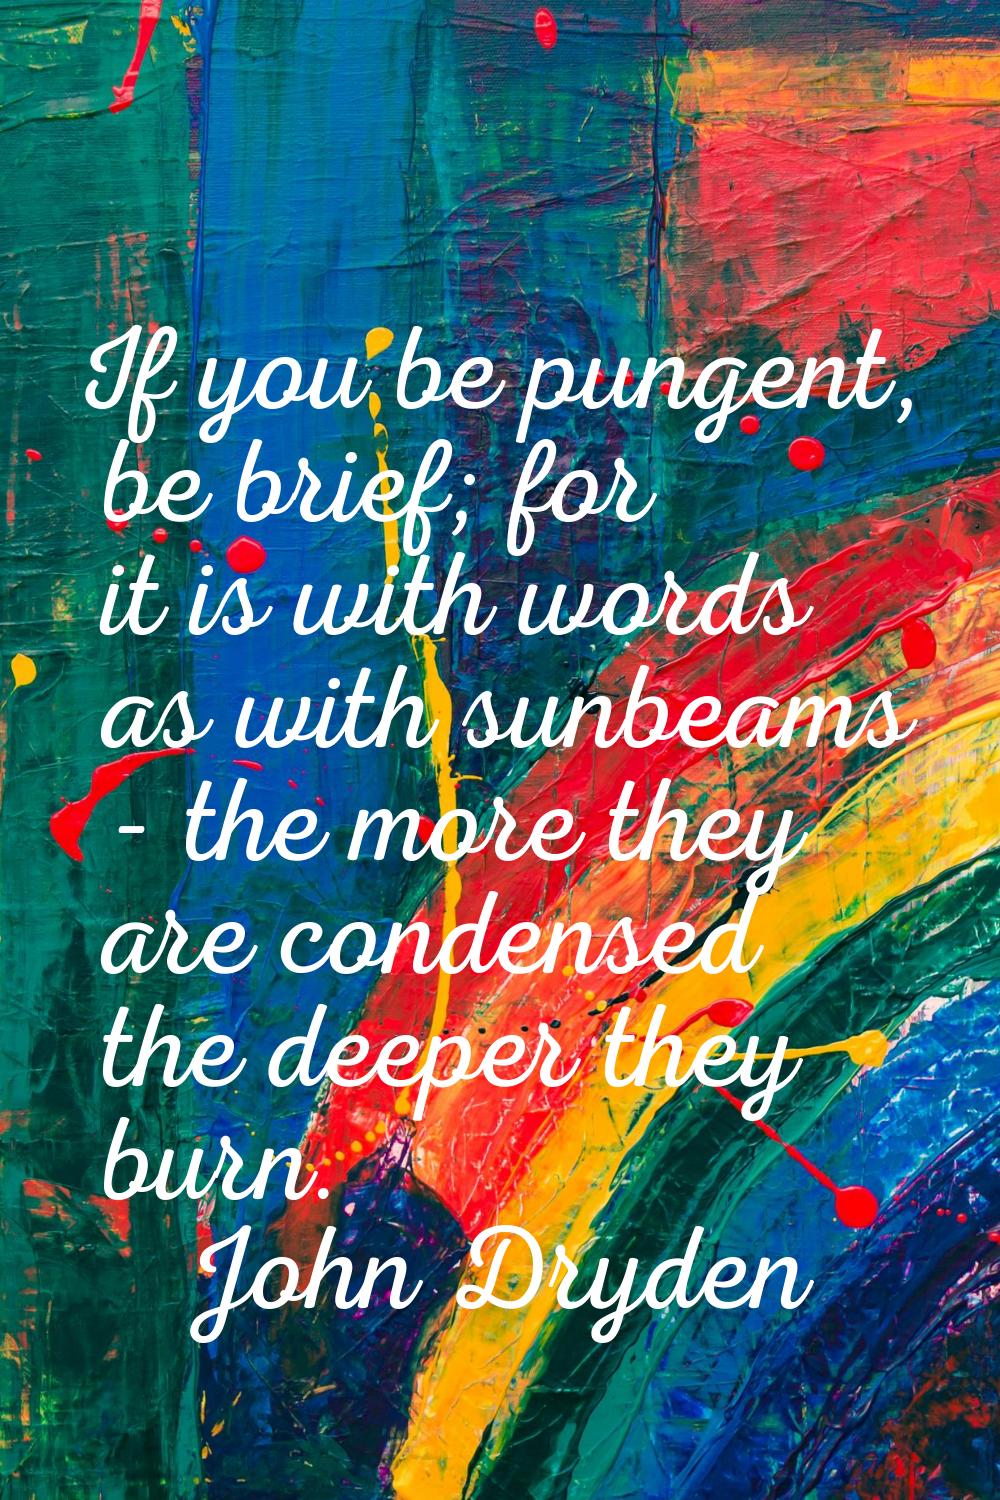 If you be pungent, be brief; for it is with words as with sunbeams - the more they are condensed th